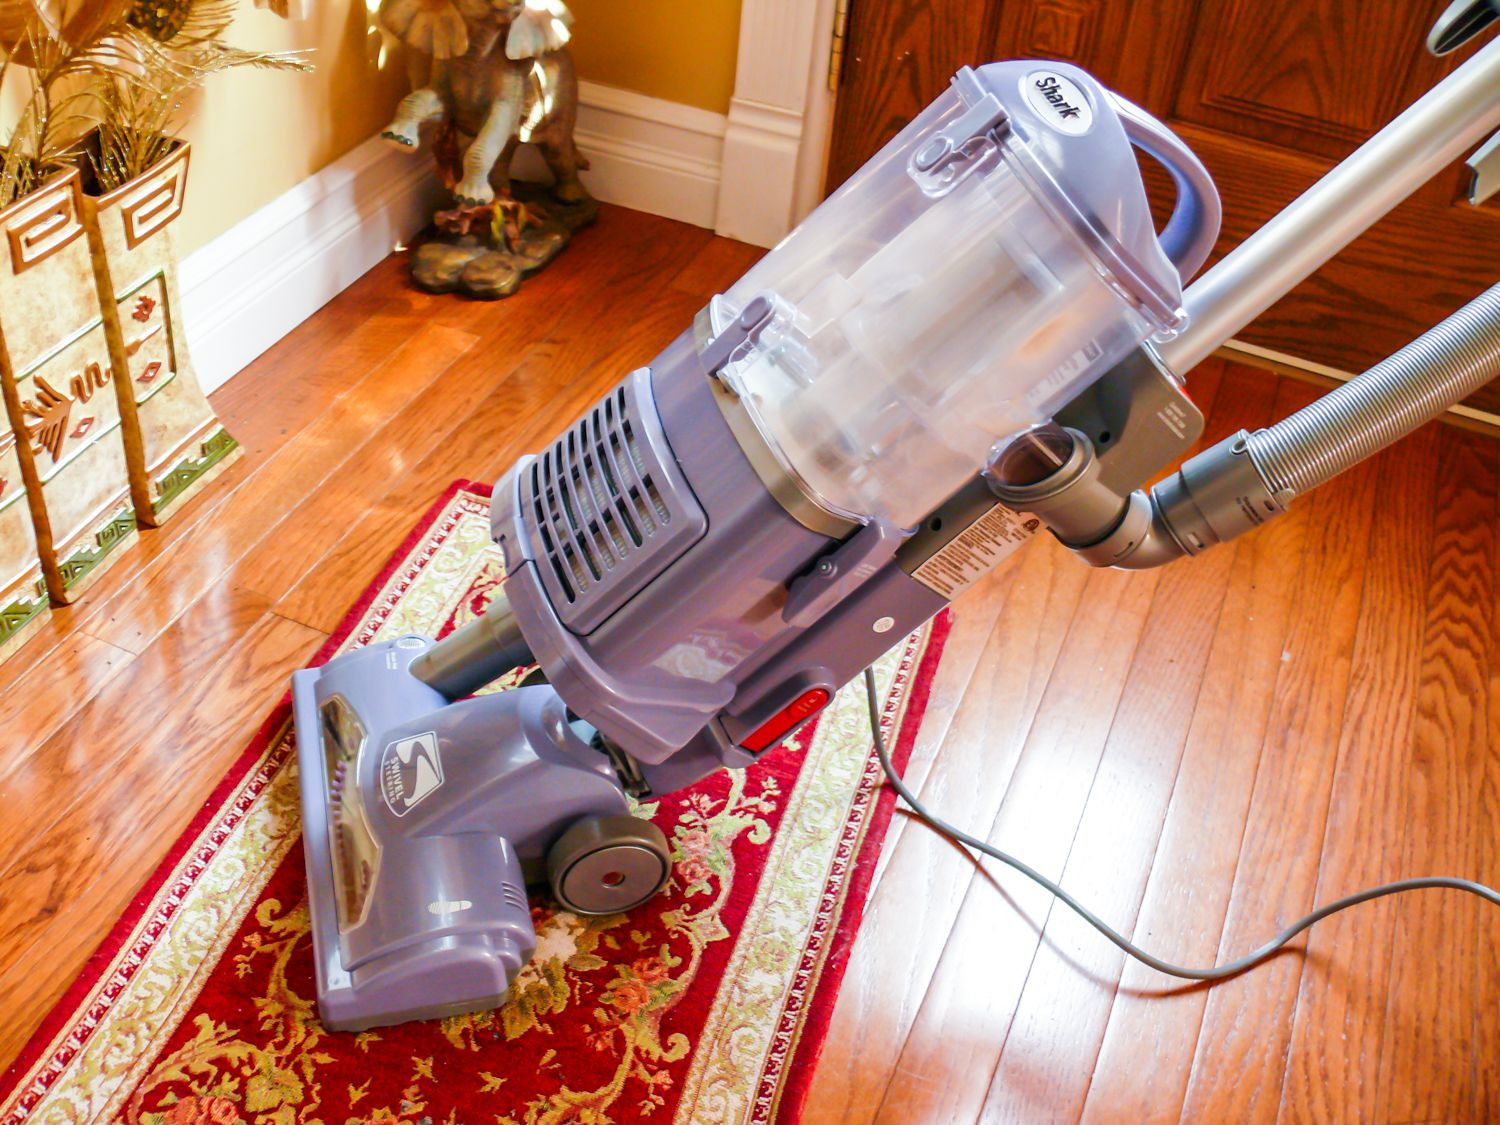 11 Lovable Lightweight Hardwood Floor Vacuum Reviews 2024 free download lightweight hardwood floor vacuum reviews of the 10 best vacuum cleaners to buy in 2018 pertaining to 4062974 2 2 5bbf718a46e0fb00519d59a7